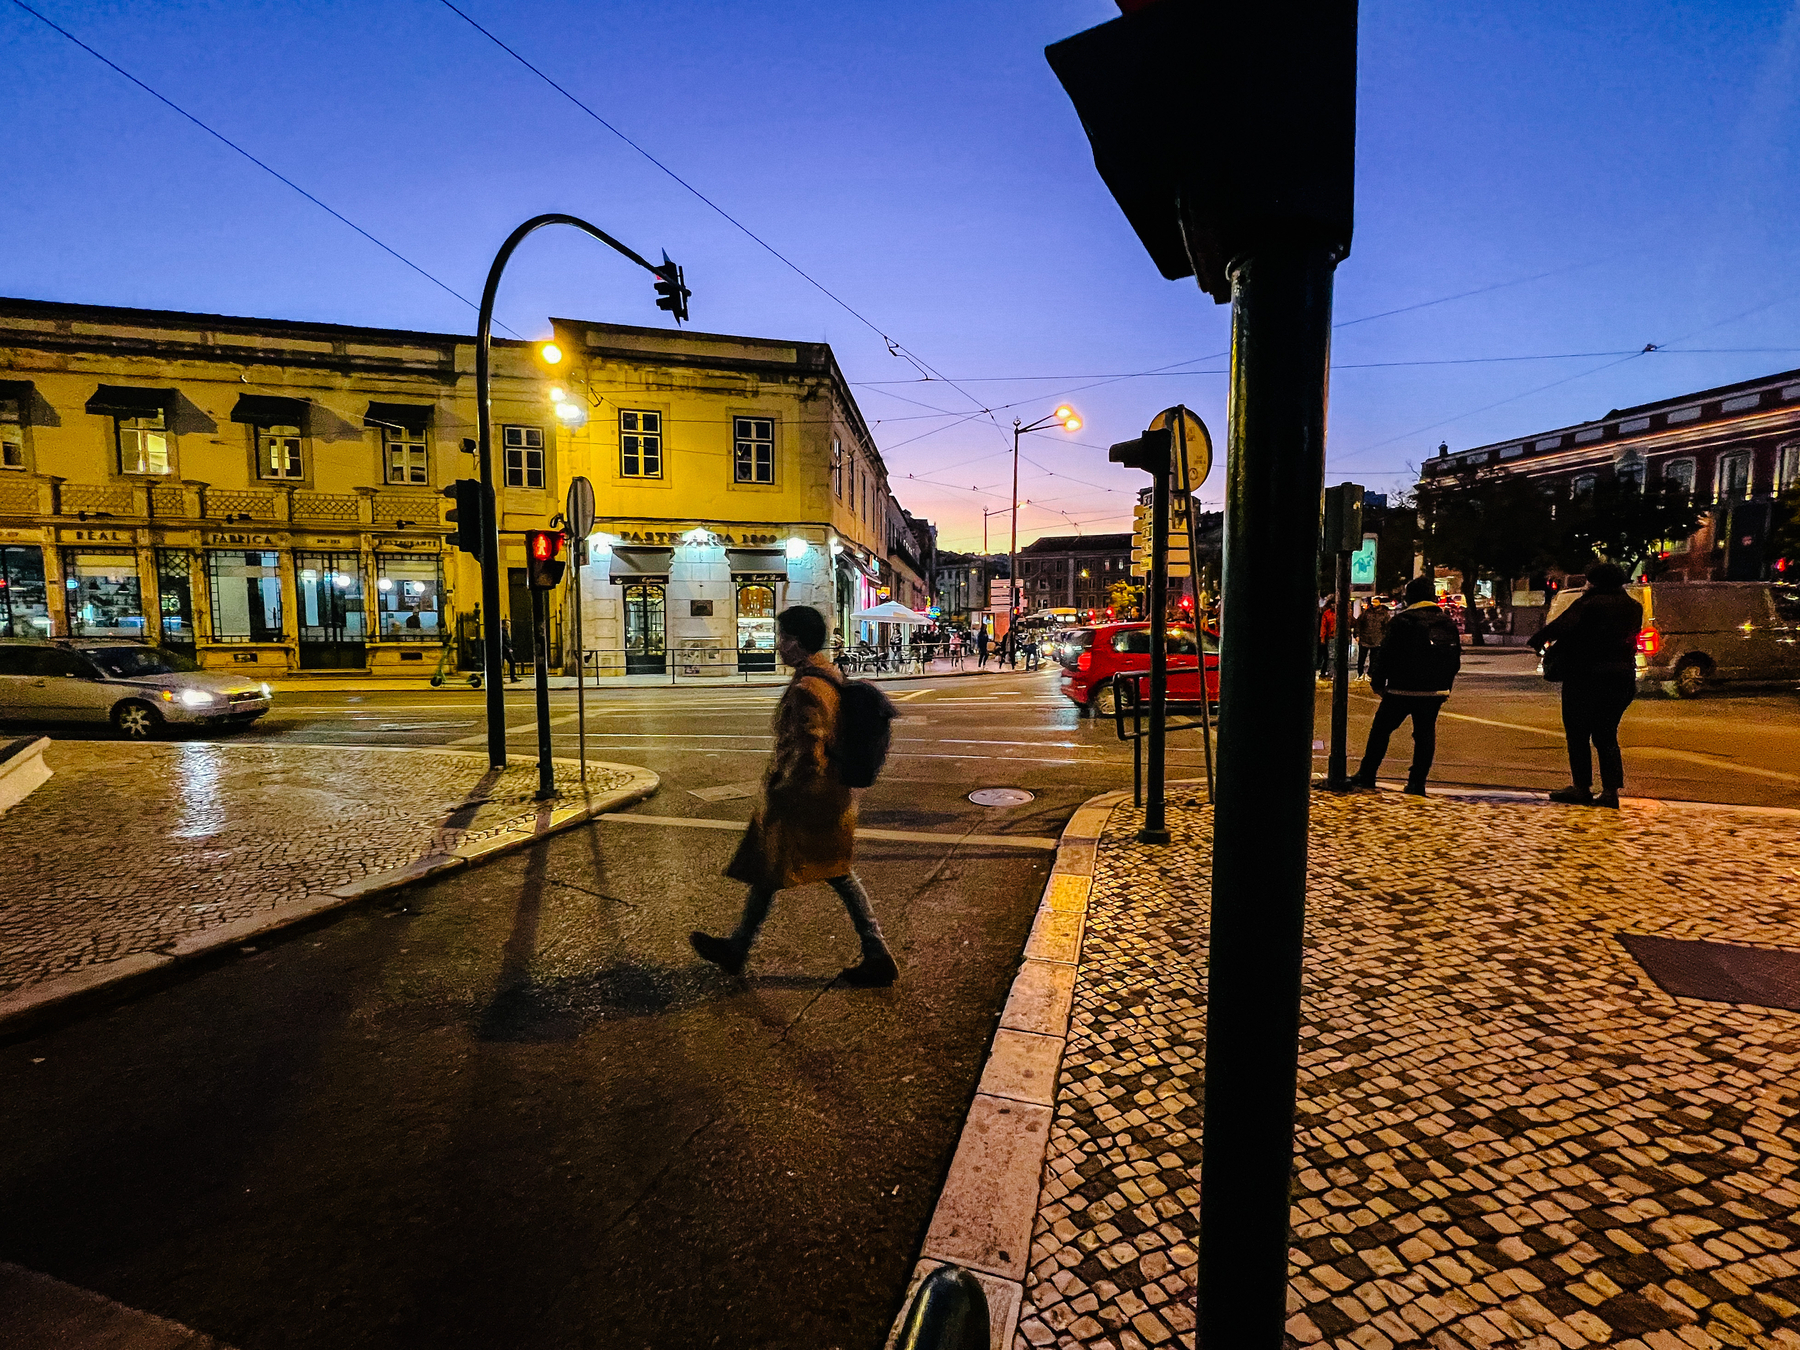 Sunset scene, a person crosses the street while cars drive by, and others wait for the green light. 